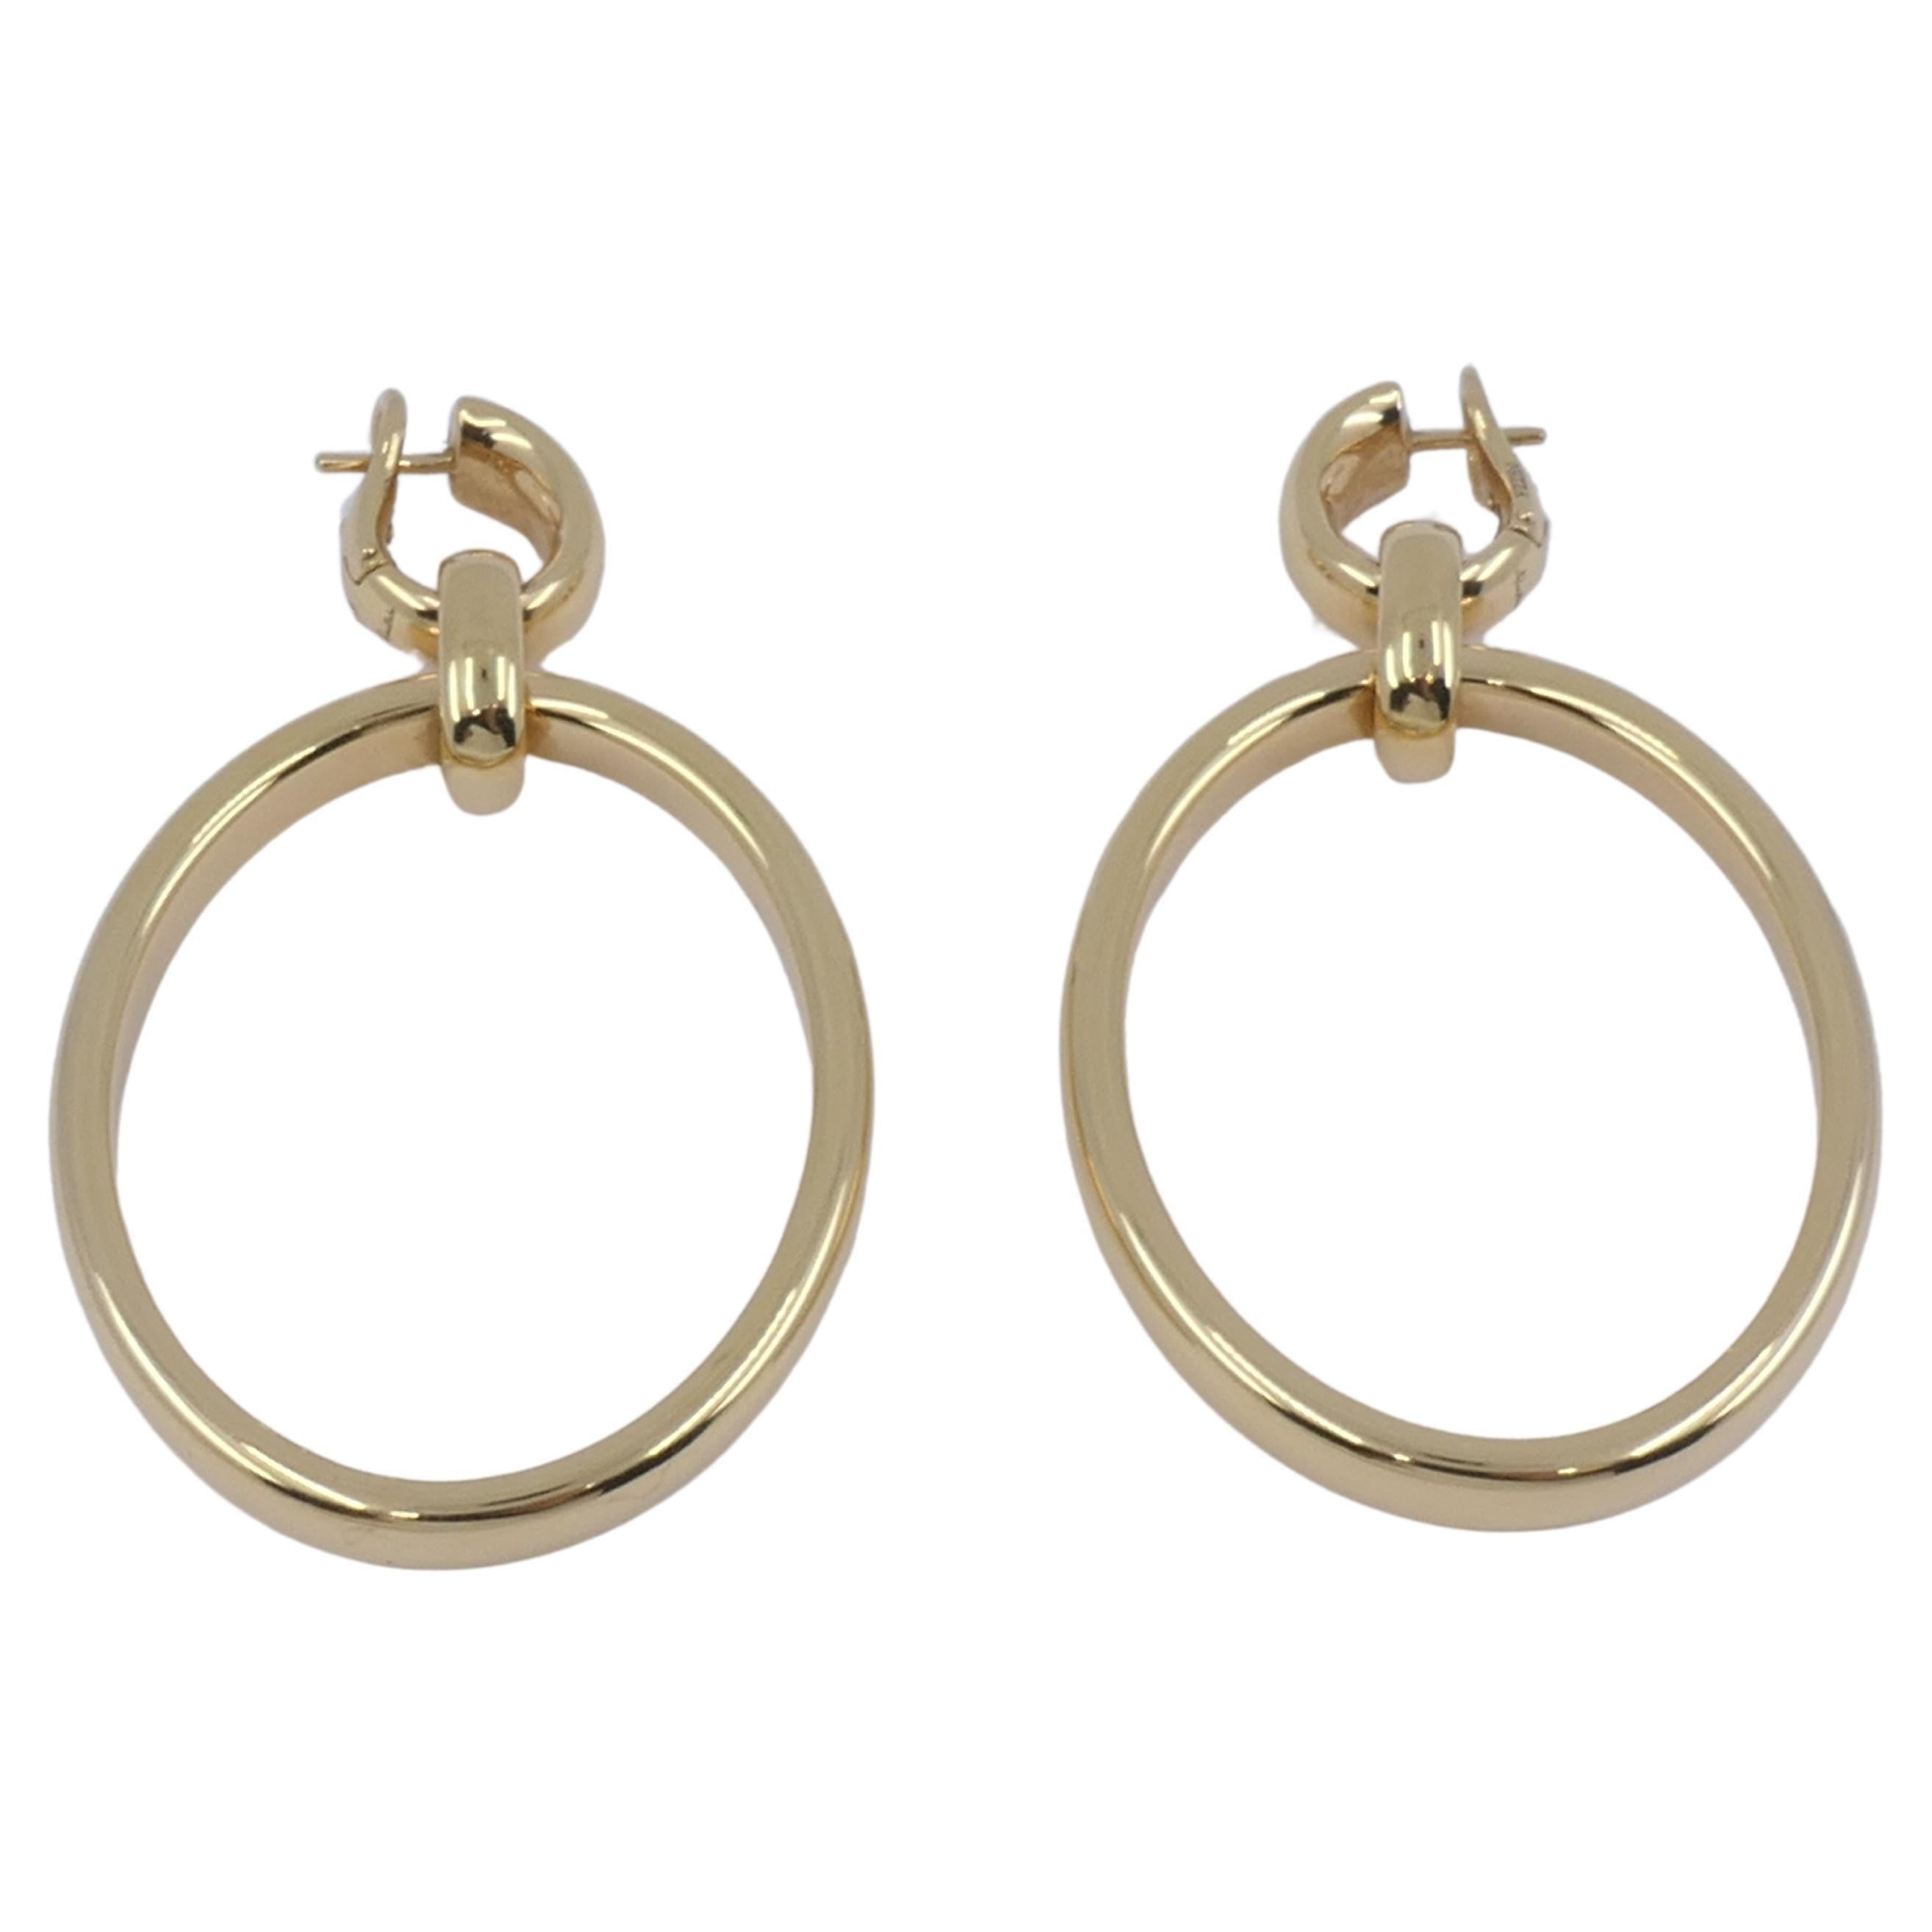 Pomellato 18k Gold Dangling Earrings  In Excellent Condition For Sale In Beverly Hills, CA